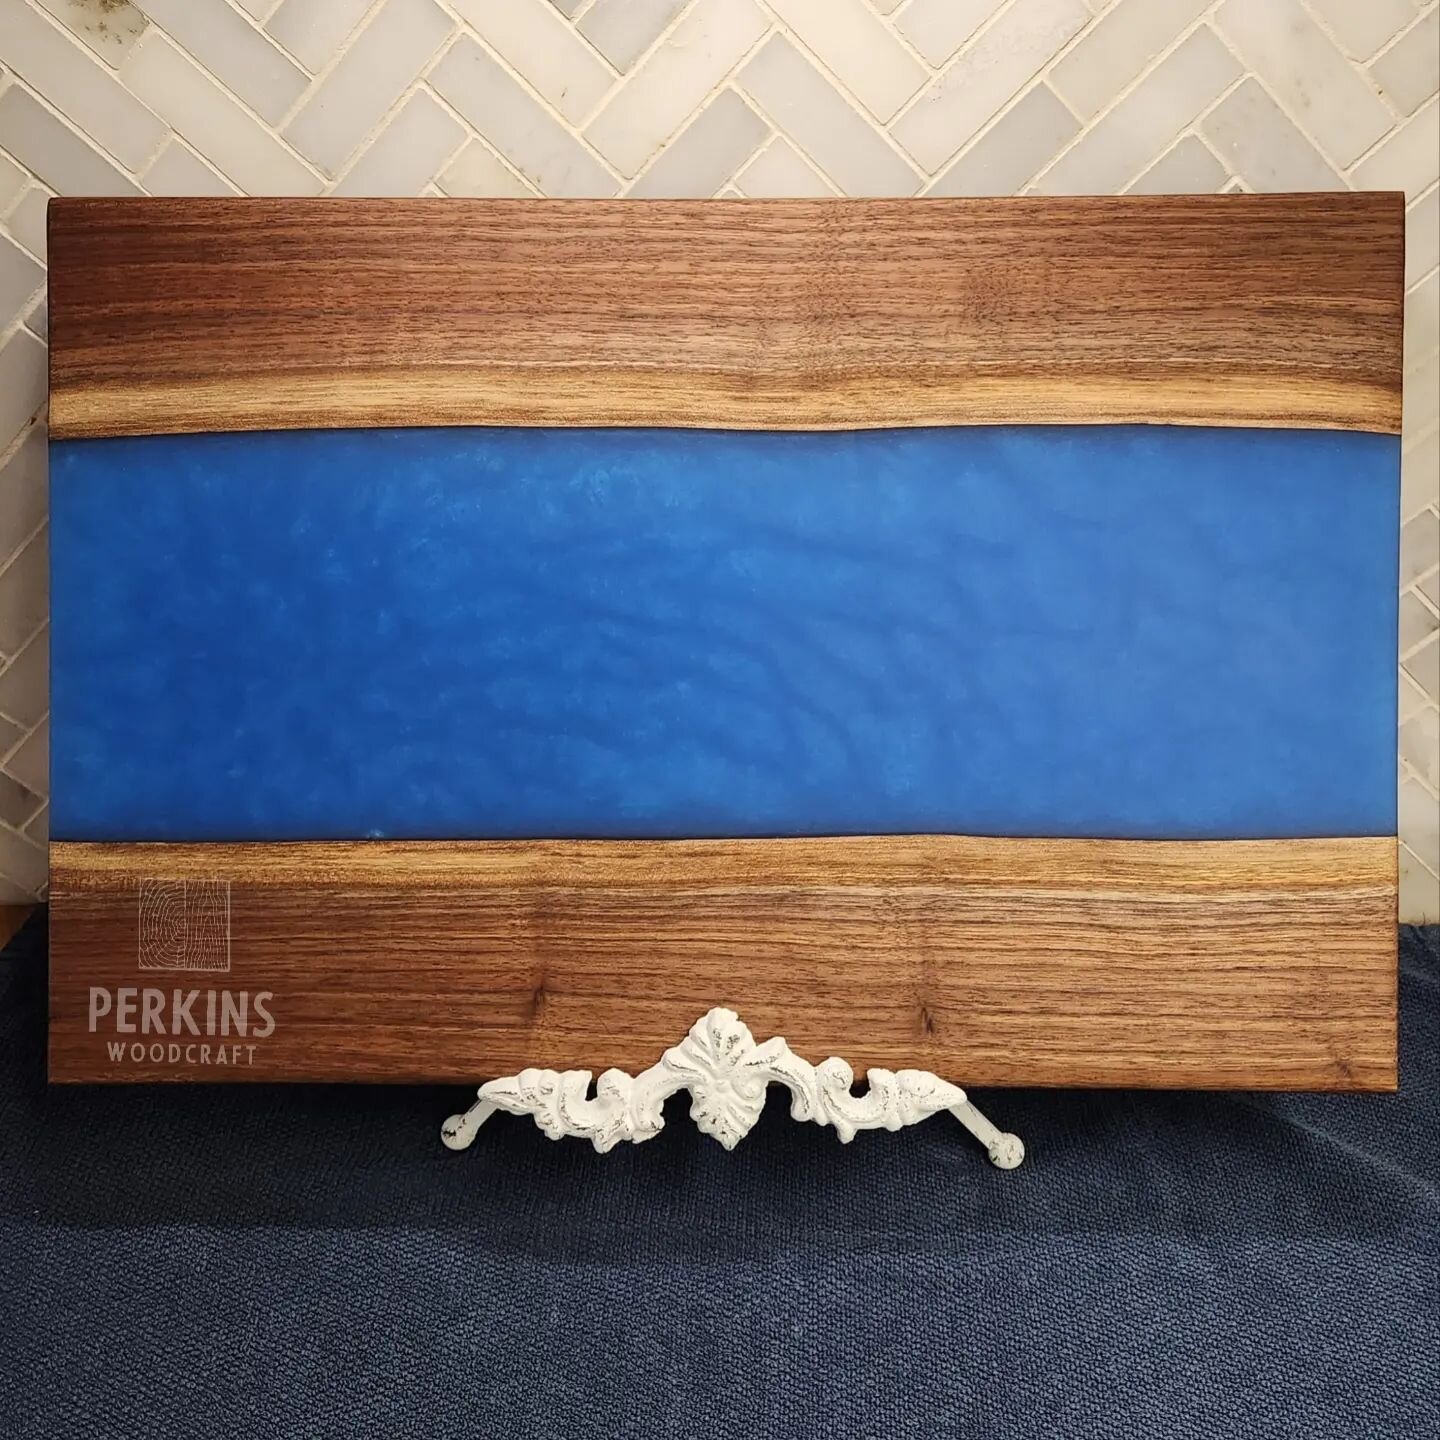 Live-edge Walnut and Sapphire Resin Charcuterie Board.  One of a kind. Just listed on PerkinsWoodcraft.com

#sapphire #sapphireresin #resinepoxy #resin #resinart #cuttingboard #charcuterie #charcuterieboard #smallbusiness #oneofakind #unique #liveedg